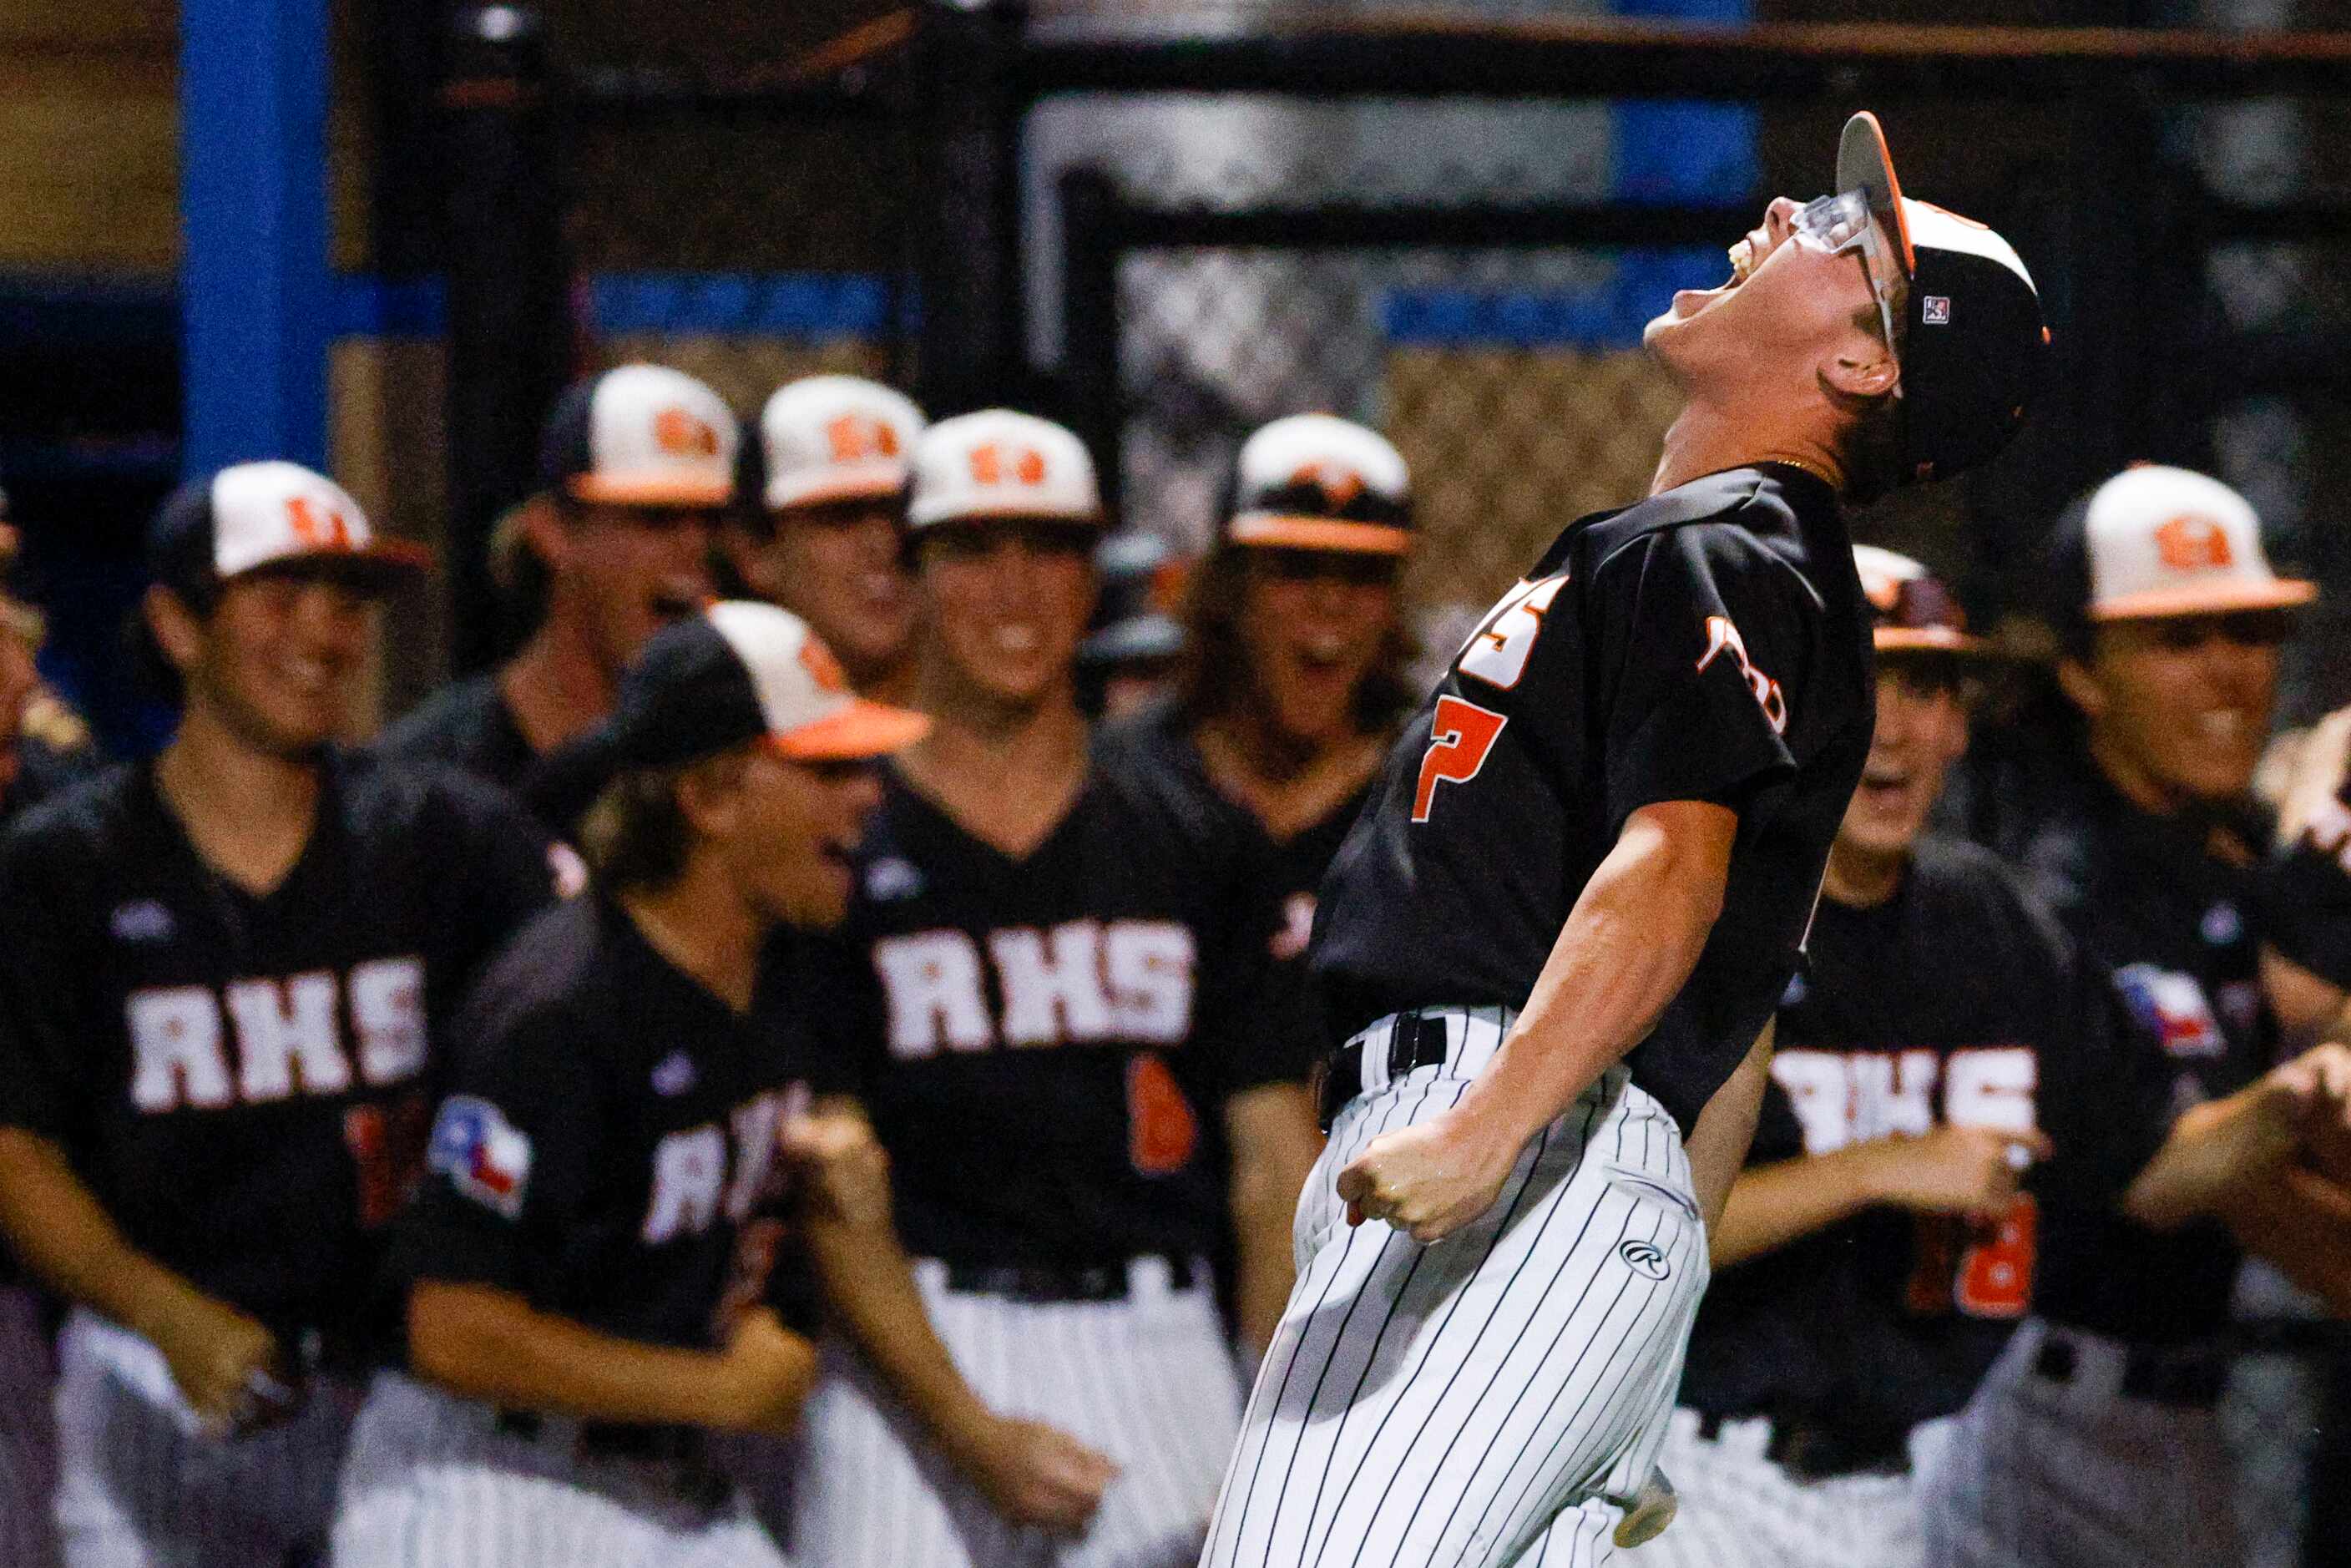 Rockwall’s Holden Blackwell (7) lets out a celebratory scream after the team scored three...